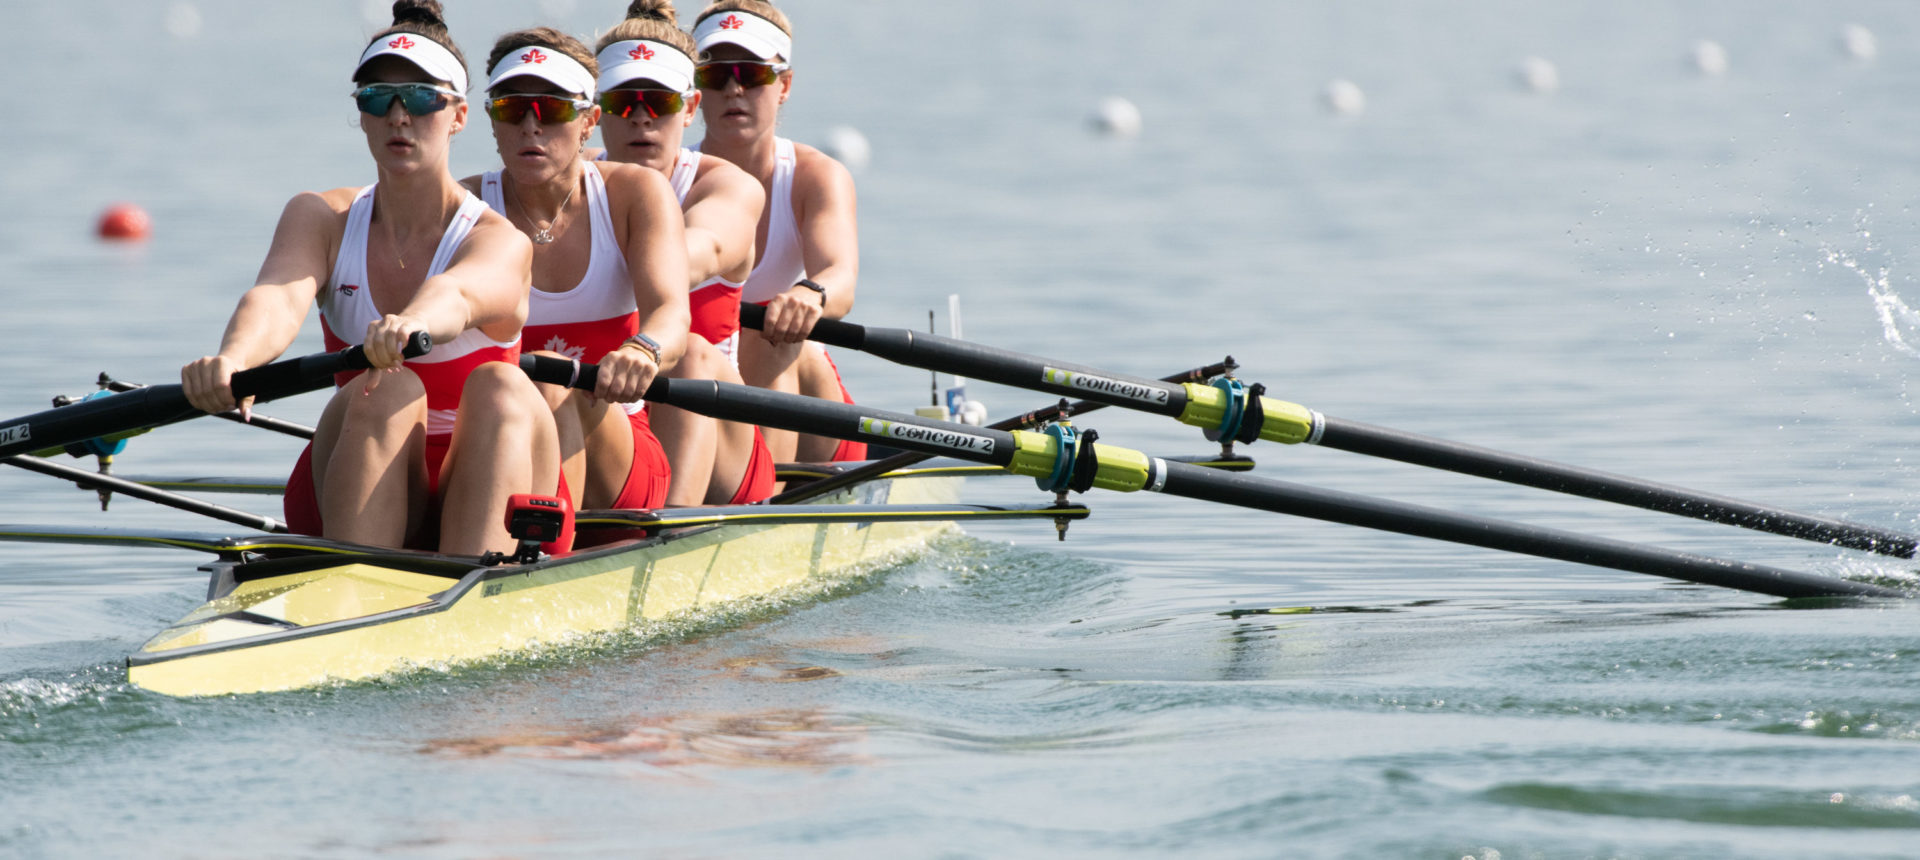 Canada continues to advance towards Tokyo 2020 qualification